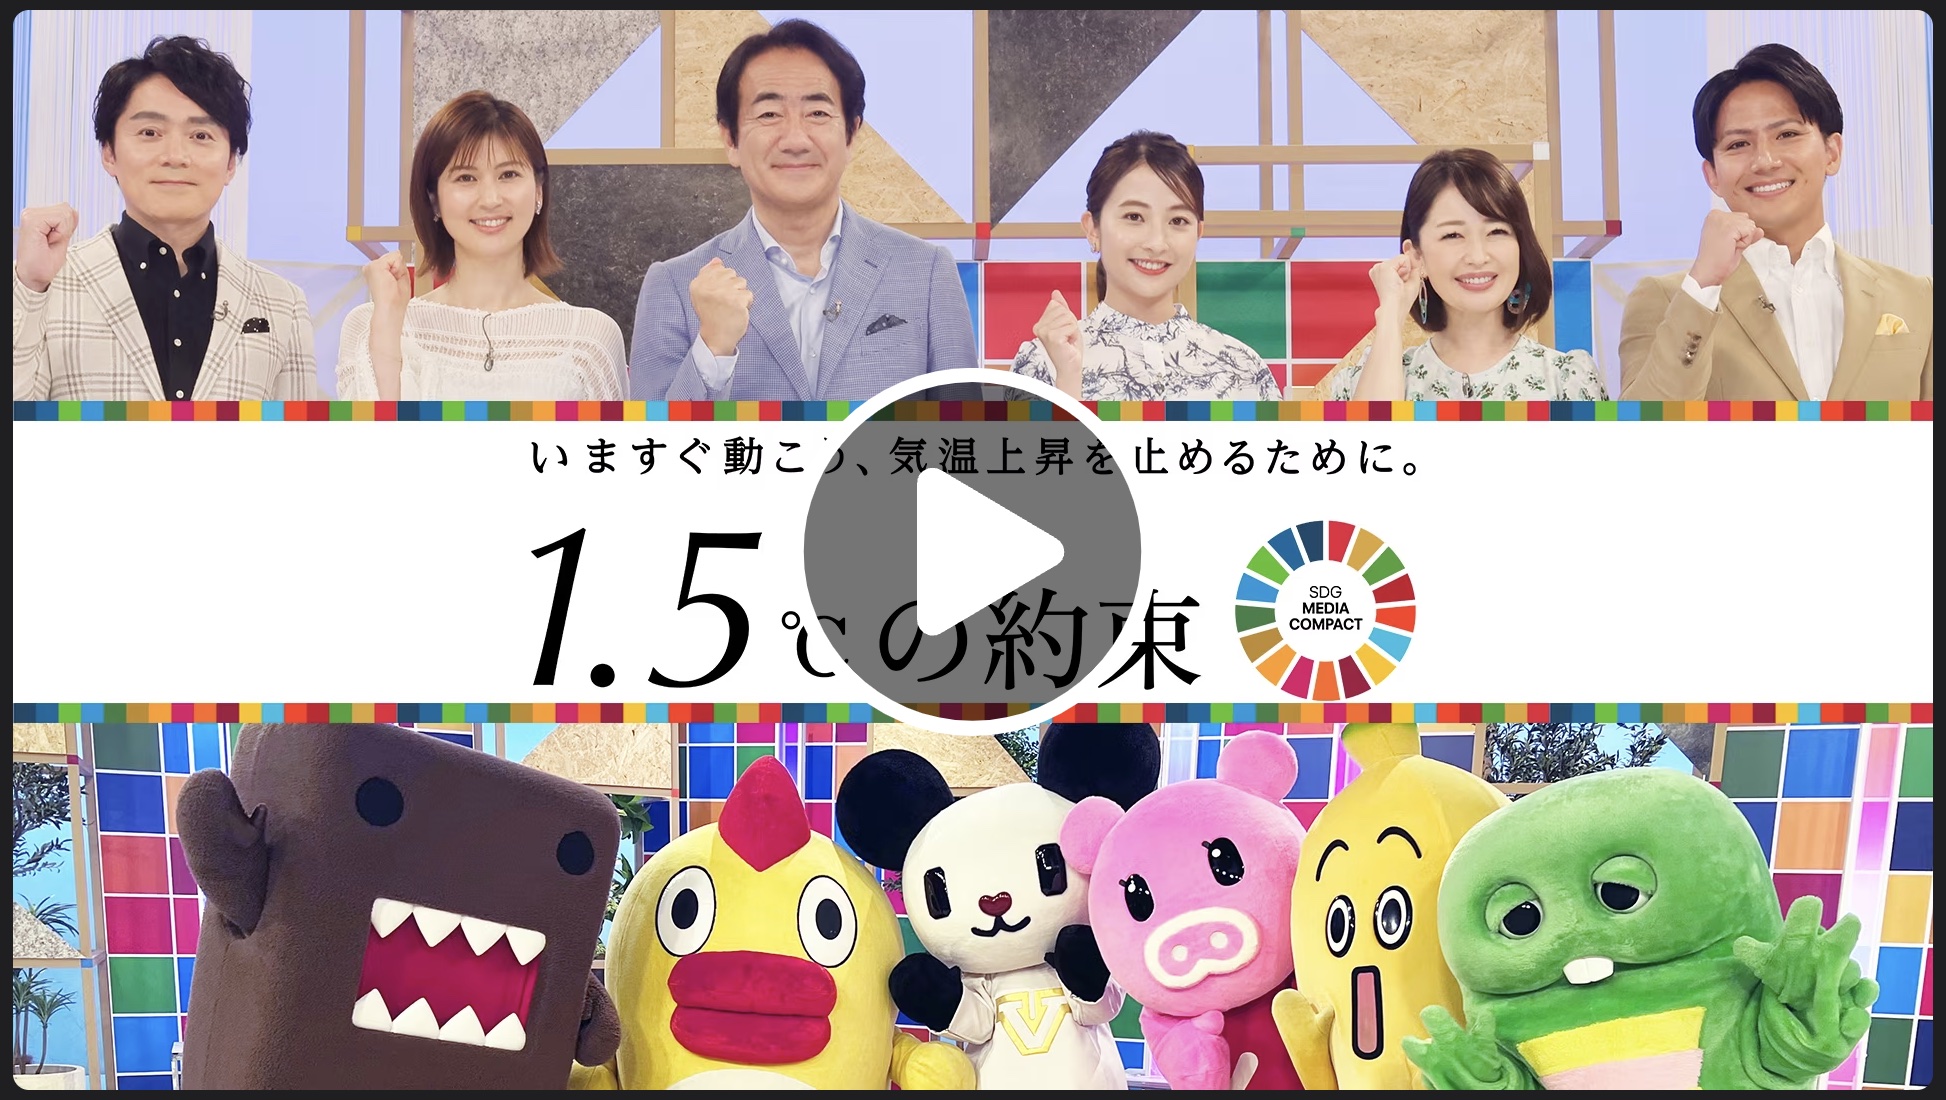 We Cooperated  NHK TV program  “The 1.5°C Promise : Move Now to Stop the Temperature Rise Campaign”